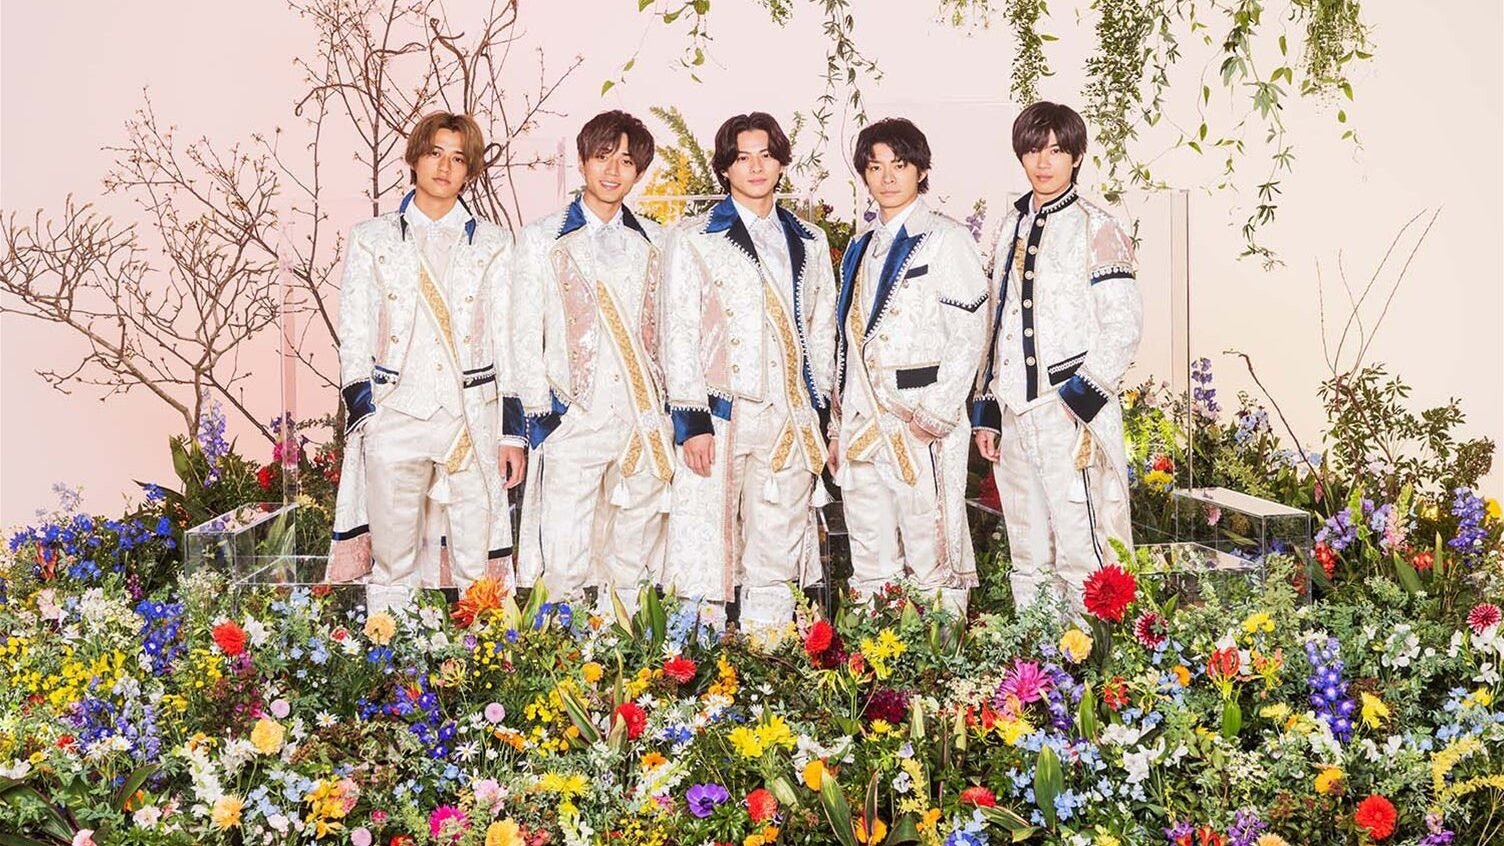 You are currently viewing King & Prince just sold 1.2m physical copies of their album Mr.5 in its first week in Japan, becoming the market’s fast-selling album this year